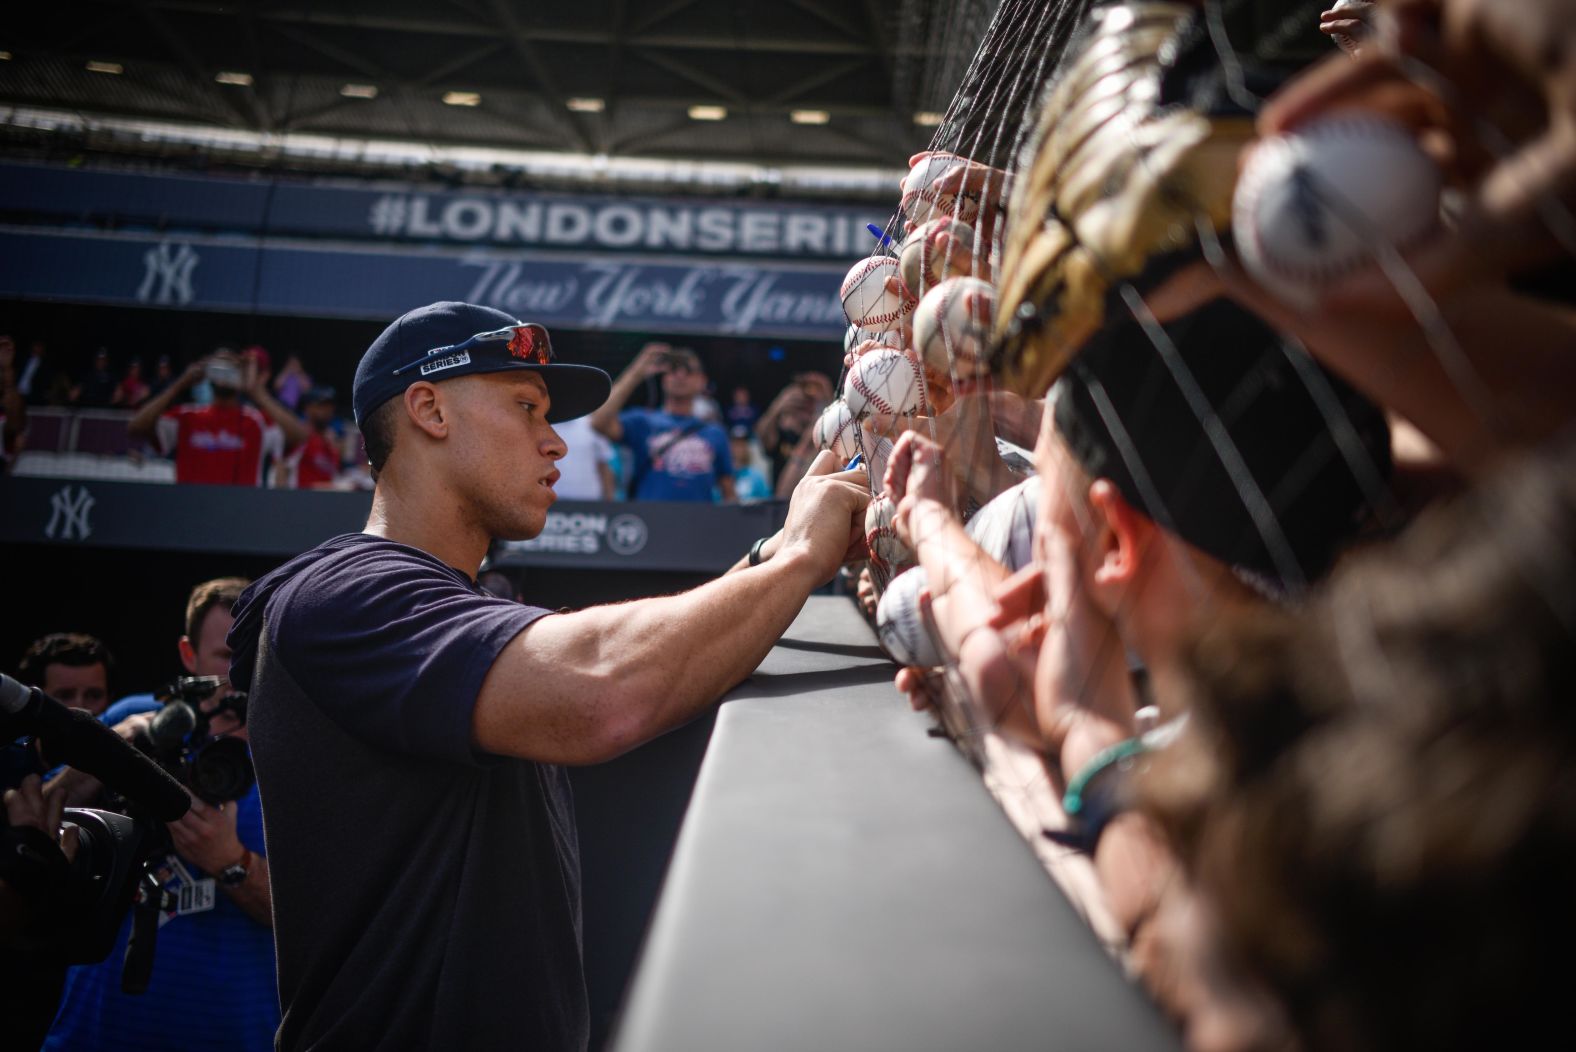 New York Yankees right fielder Aaron Judge signs autographs at the London Stadium on June 28.